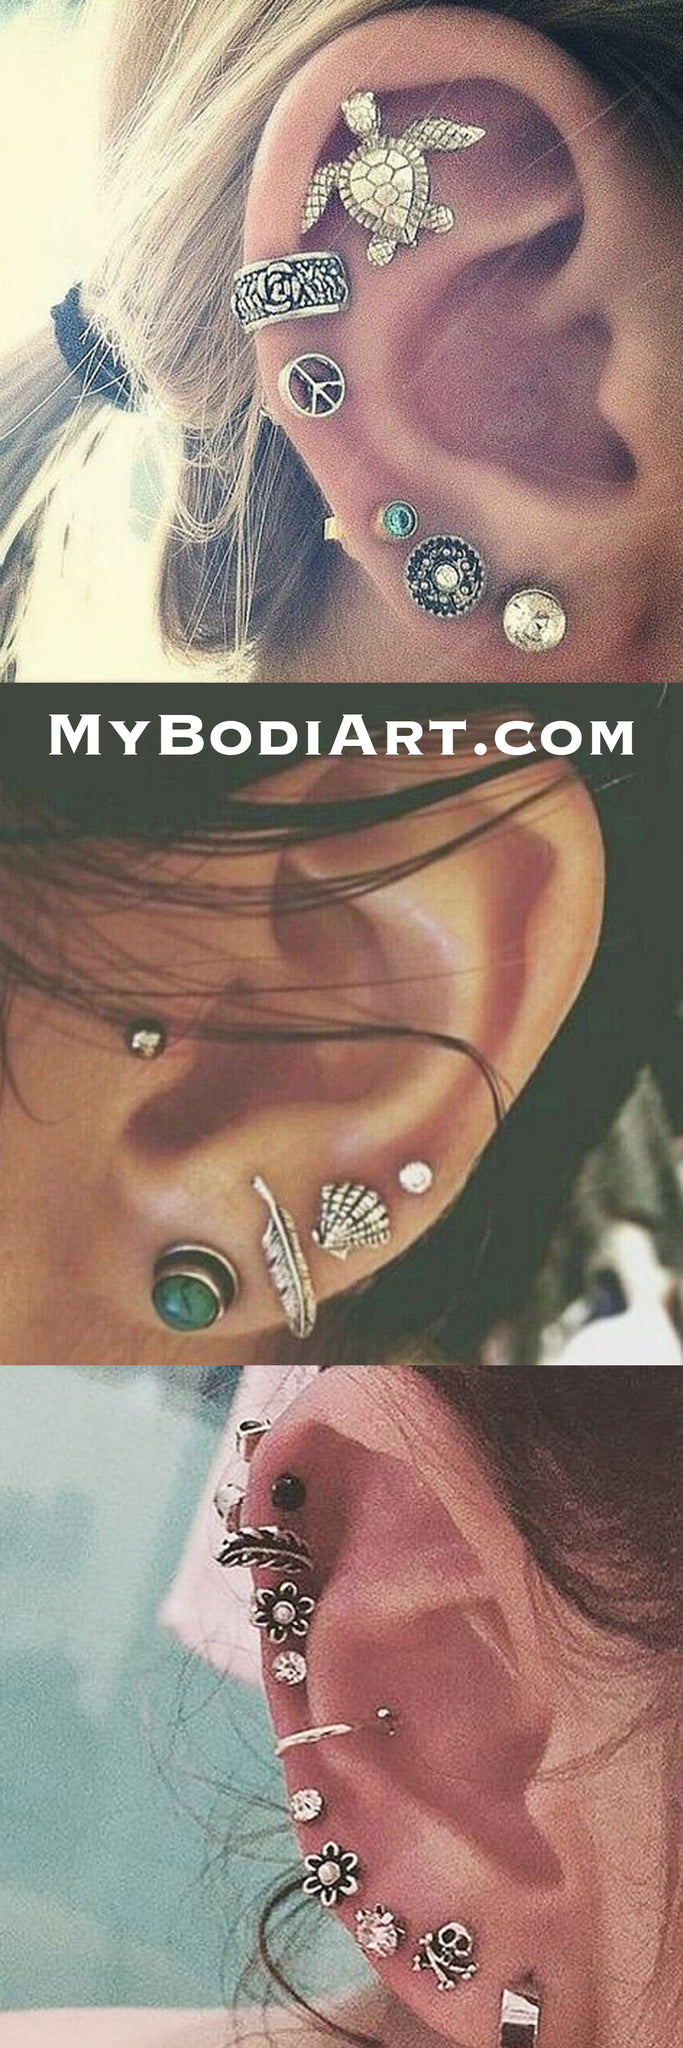 Boho Ear Piercing Ideas at MyBodiArt.com - Antiqued Silver Turtle Leaf Shell Turquoise All Around Earrings 